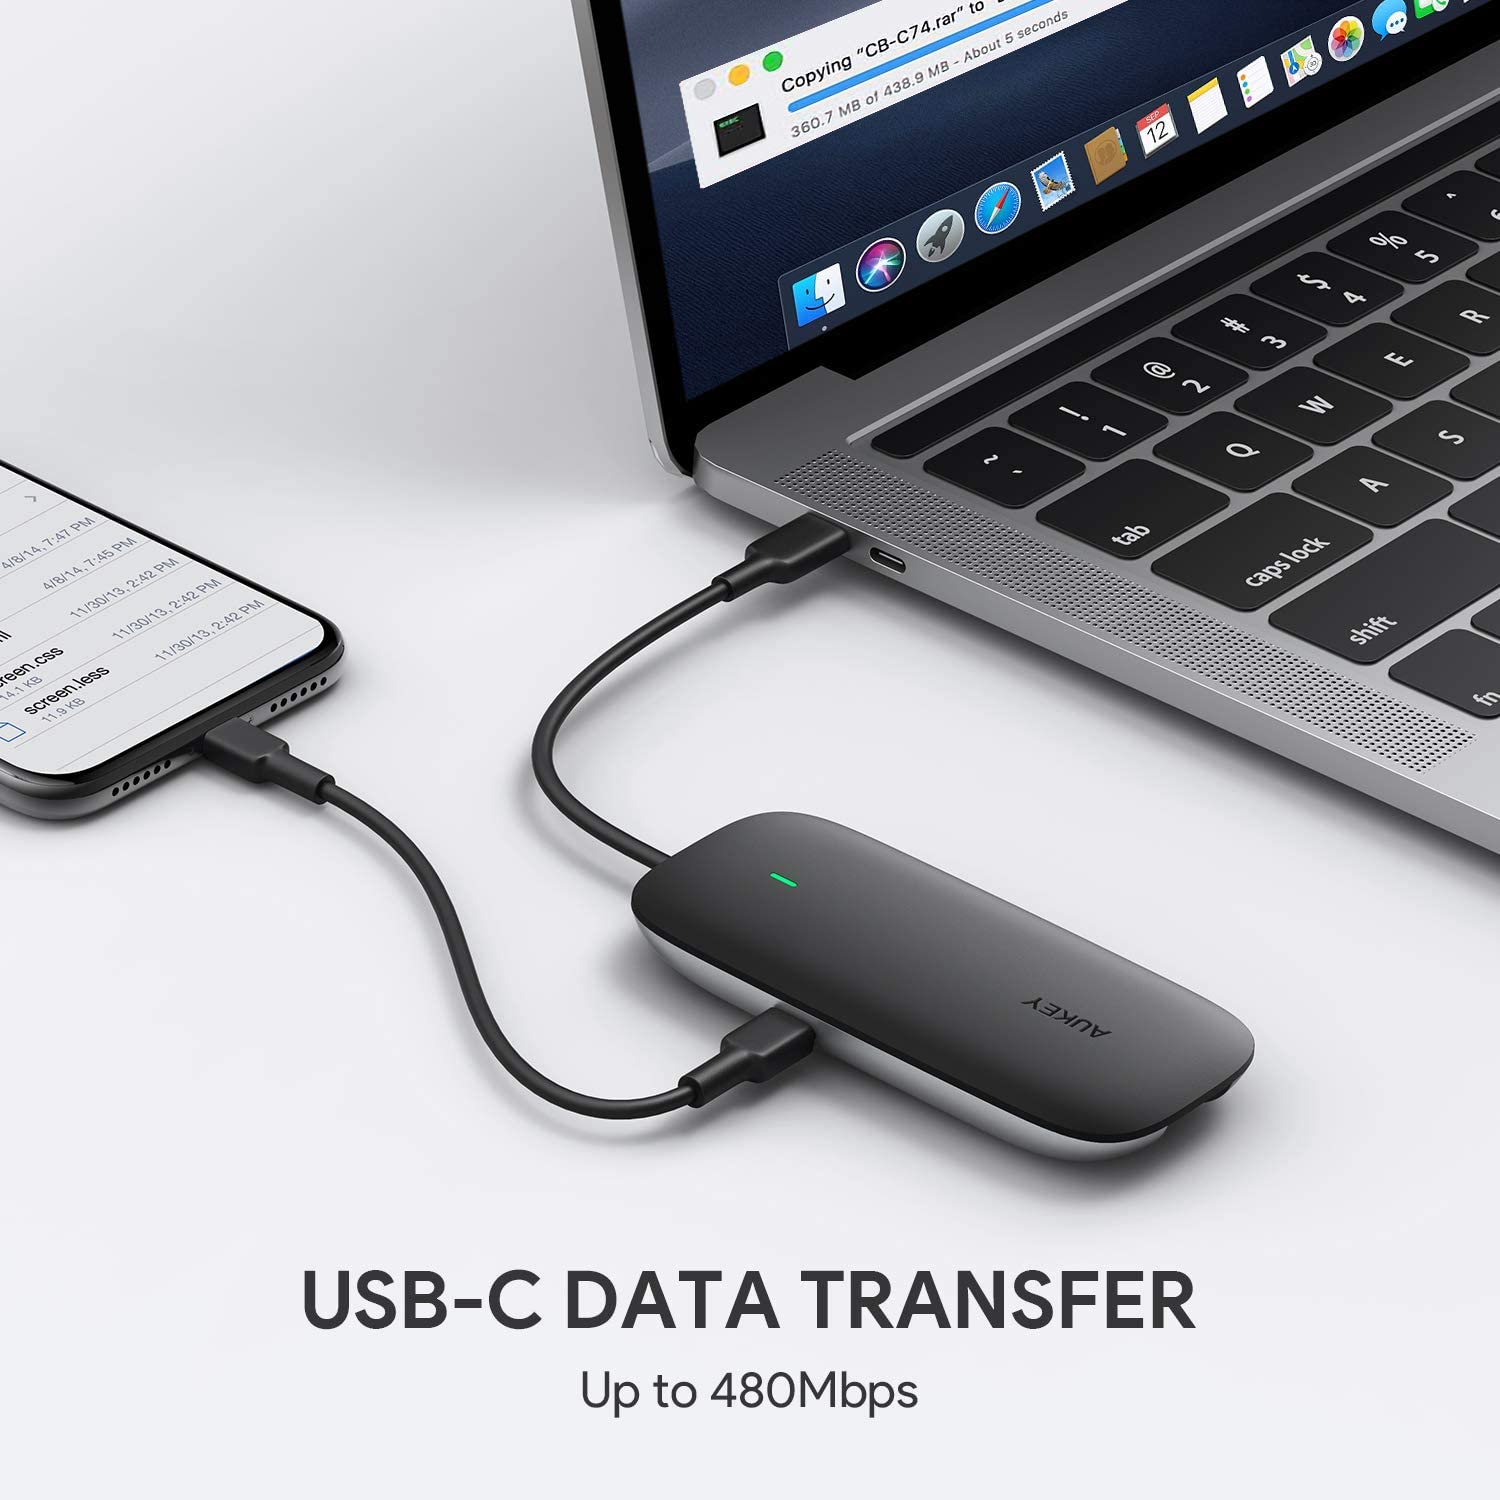 CB-C74 5 in 1 USB C Hub Ethernet Adapter with SD/TF Card Reader